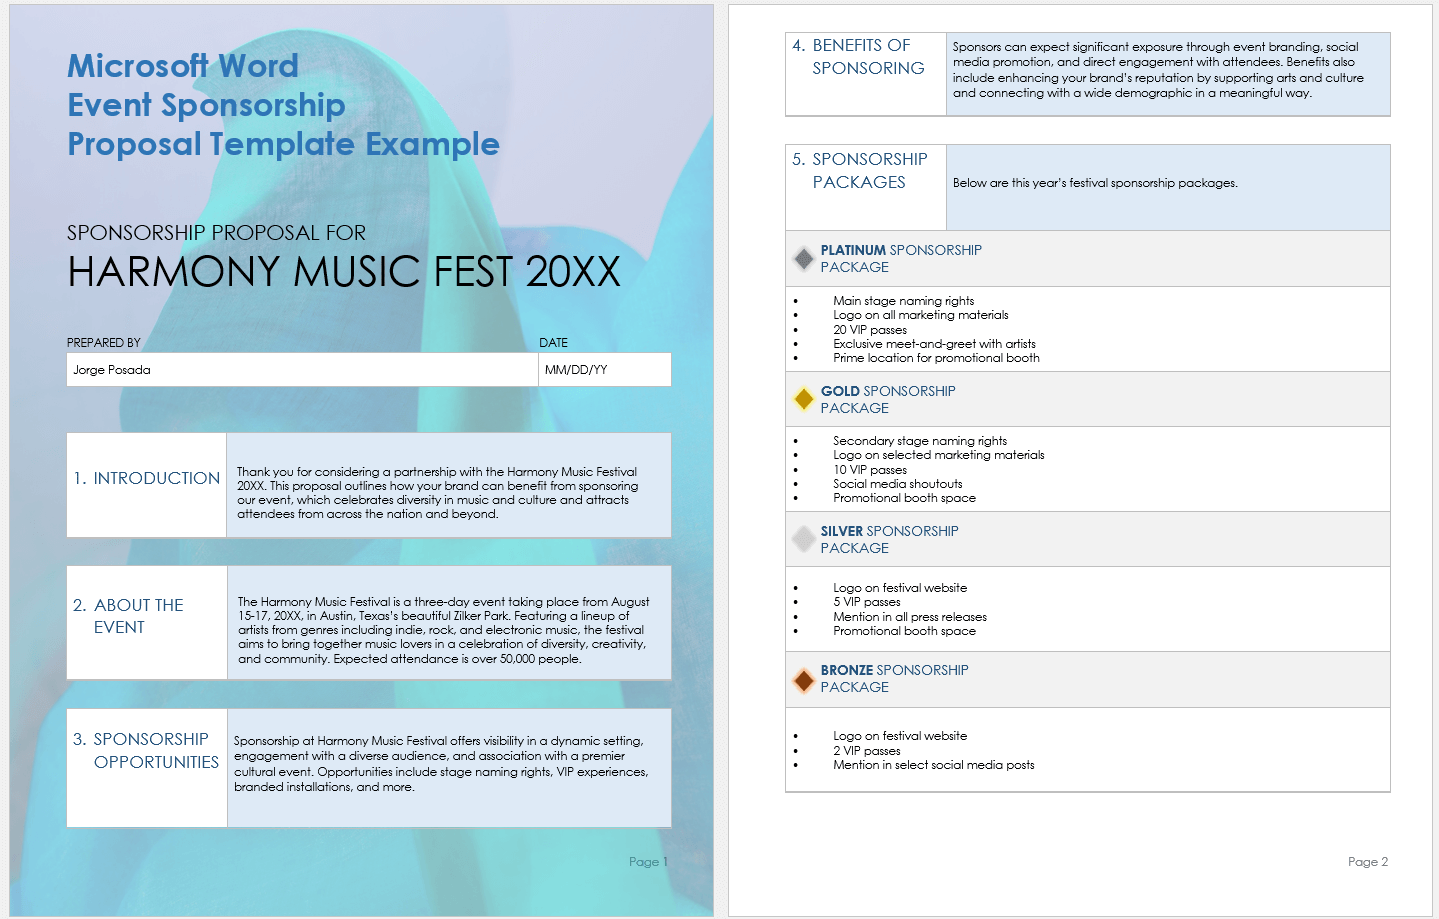 Microsoft Word Event Sponsorship Proposal Template Example